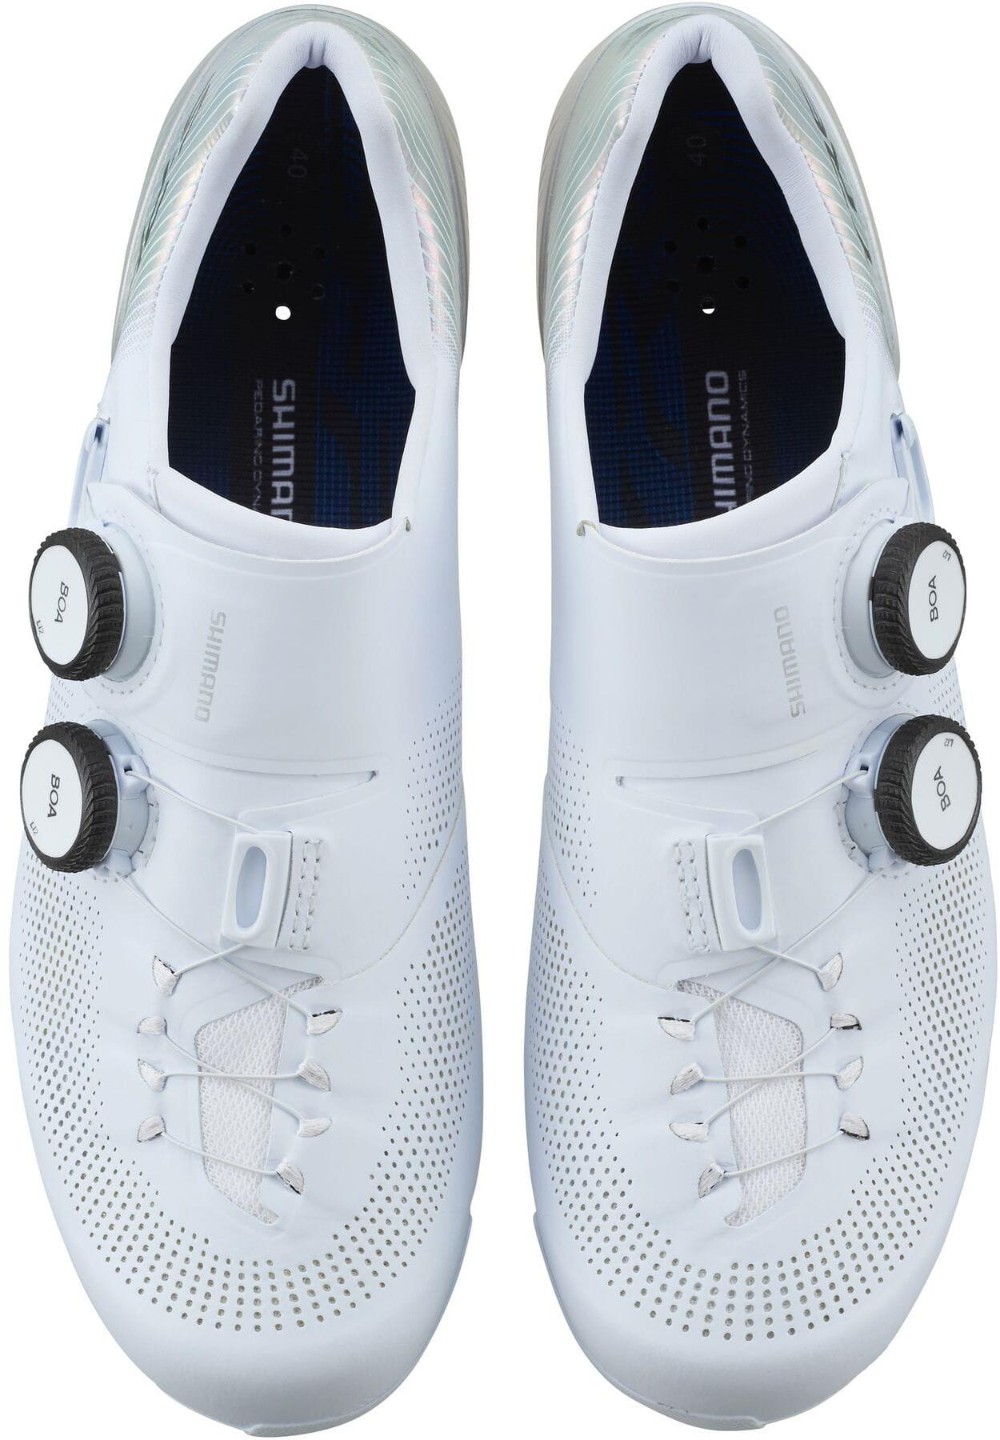 RC9 S-Phyre (RC903W) Womens Road Cycling Shoes image 2